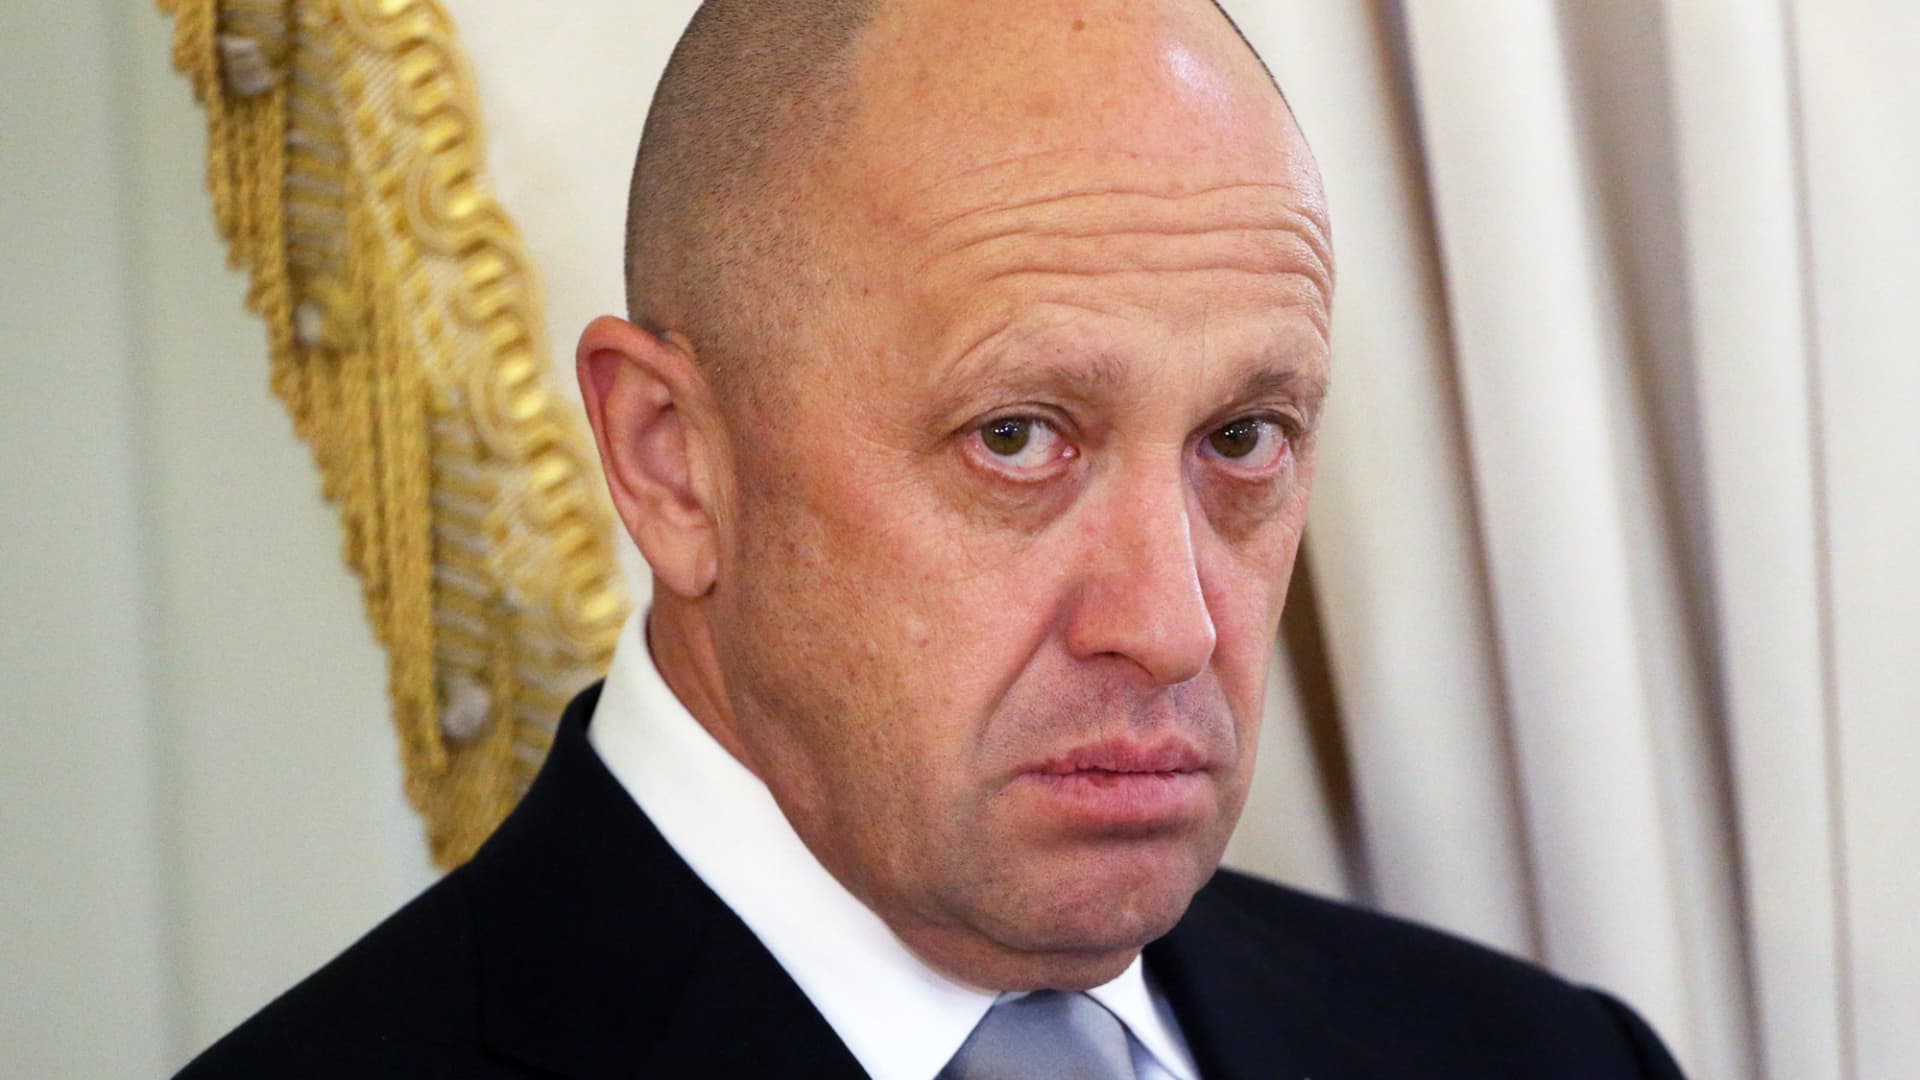 Yevgeny Prigozhin, head of the Wagner Group, claimed in May that his mercenary fighters captured Bakhmut after nine months of intense fighting there.